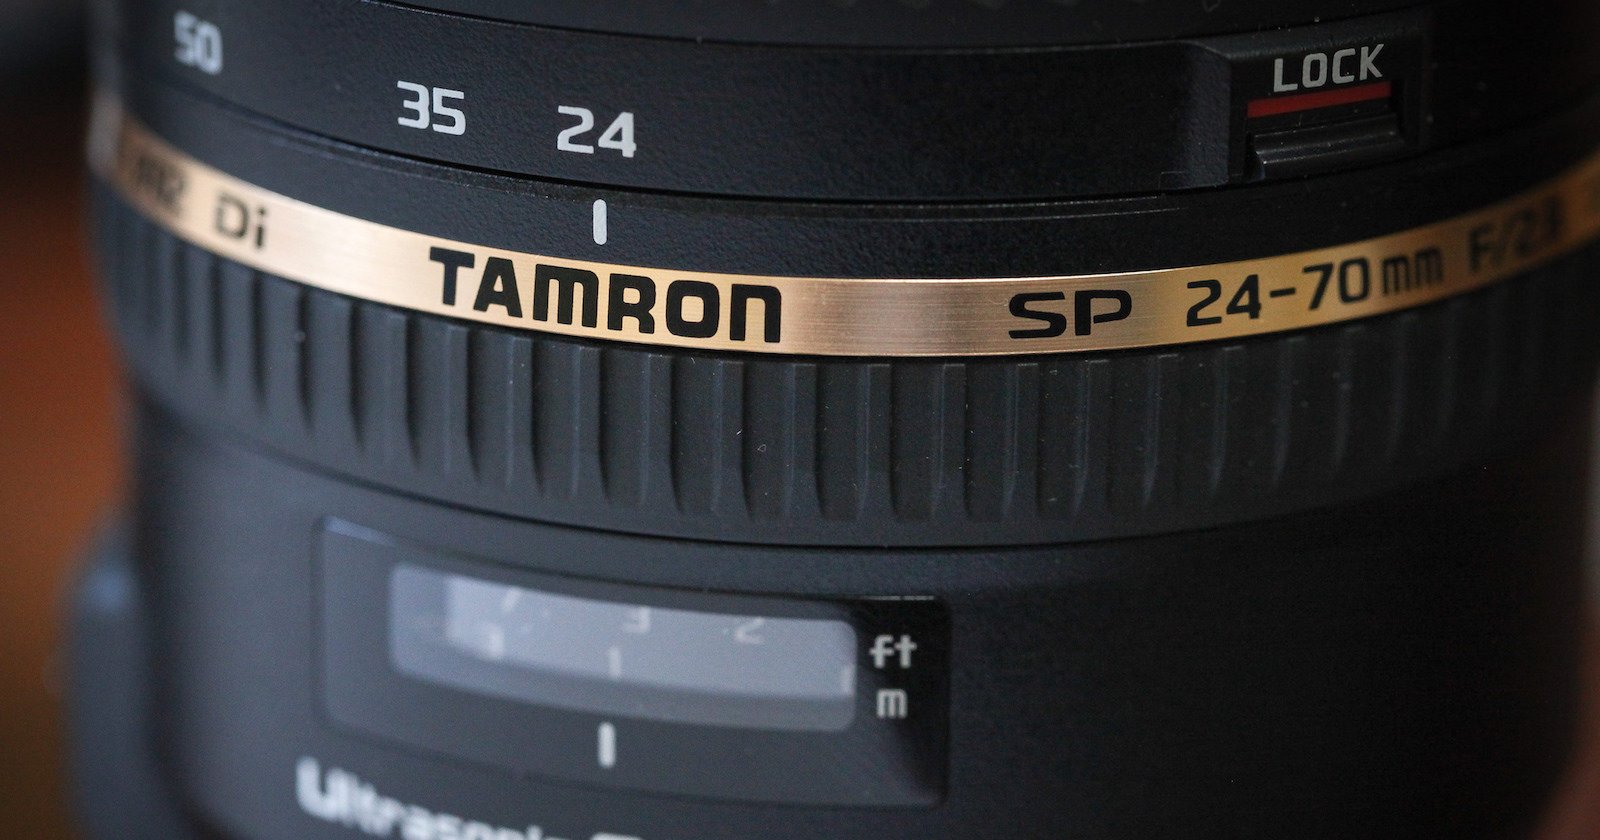 Tamron Will Release a New 24-70mm f/2.8 Lens this Year: Rumor